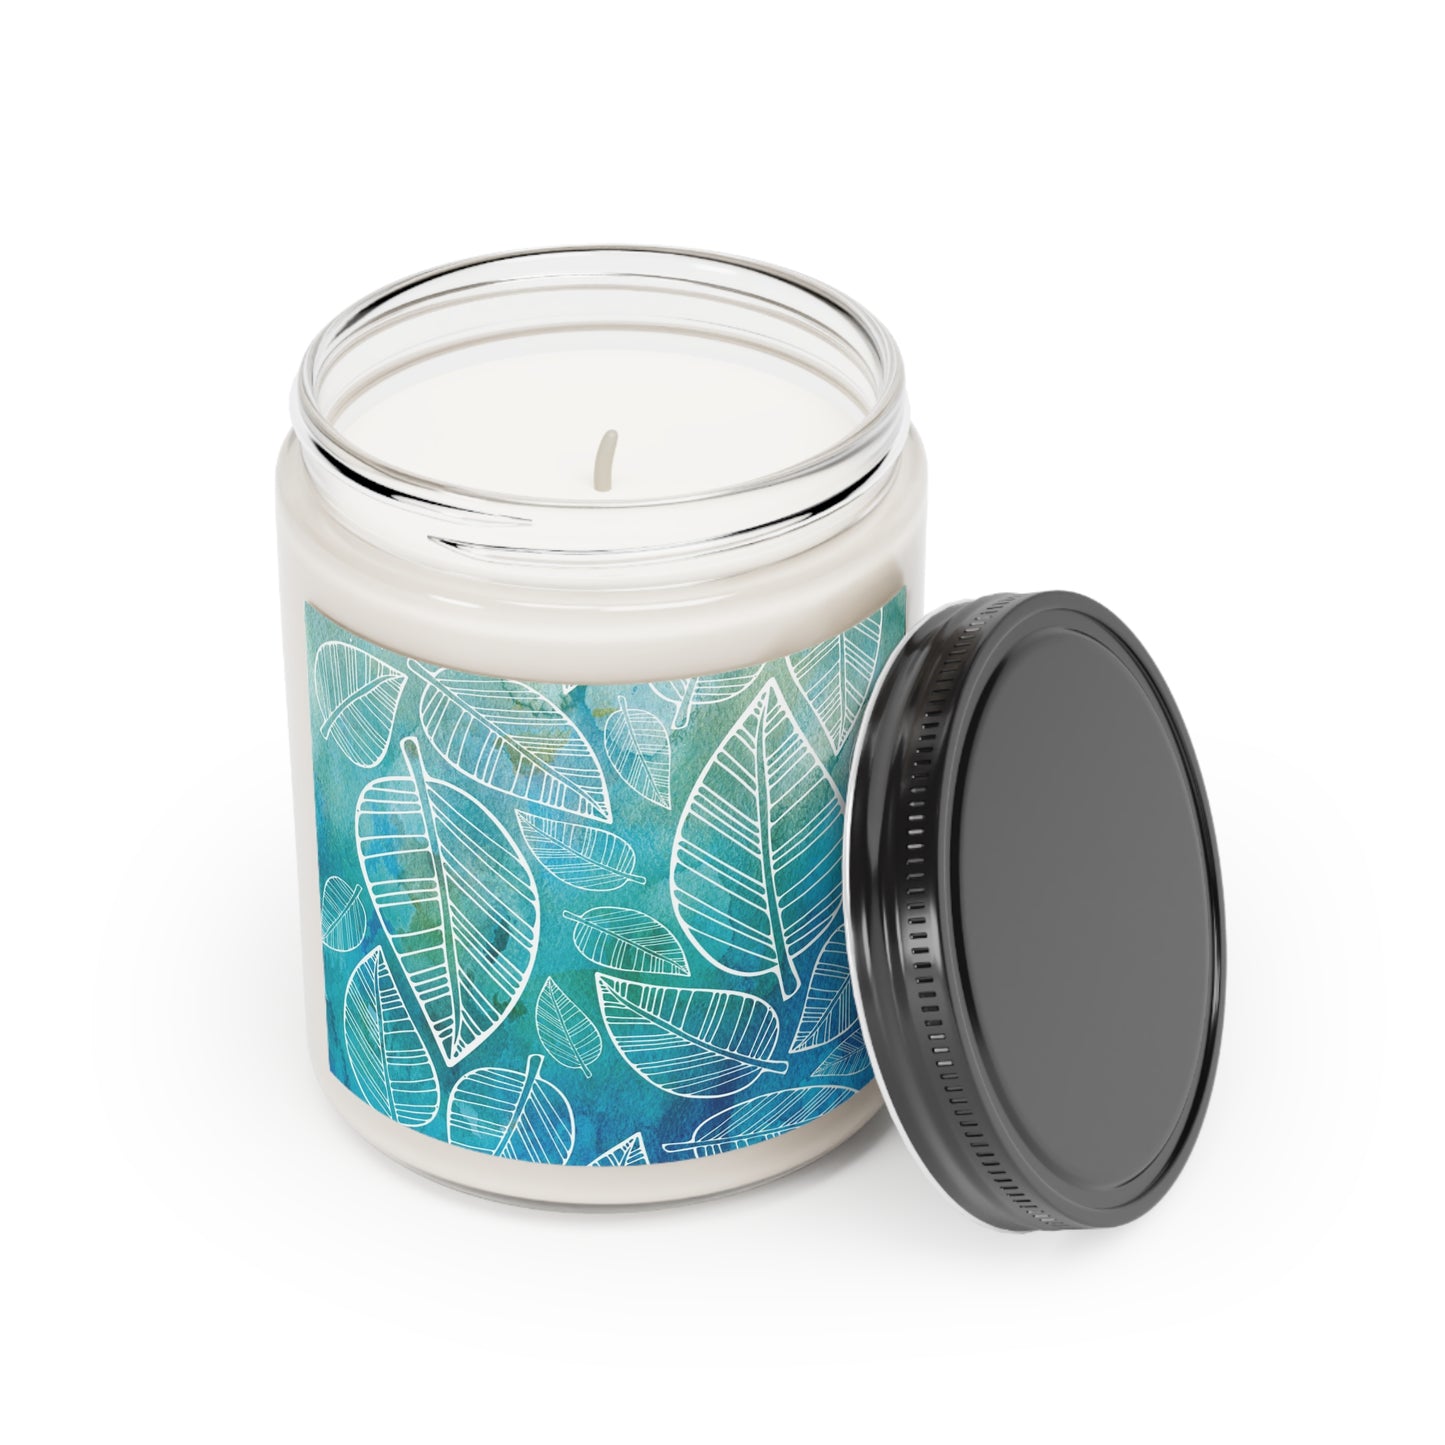 Falling Leaves by Lara Kulpa | Scented Candle, 9oz